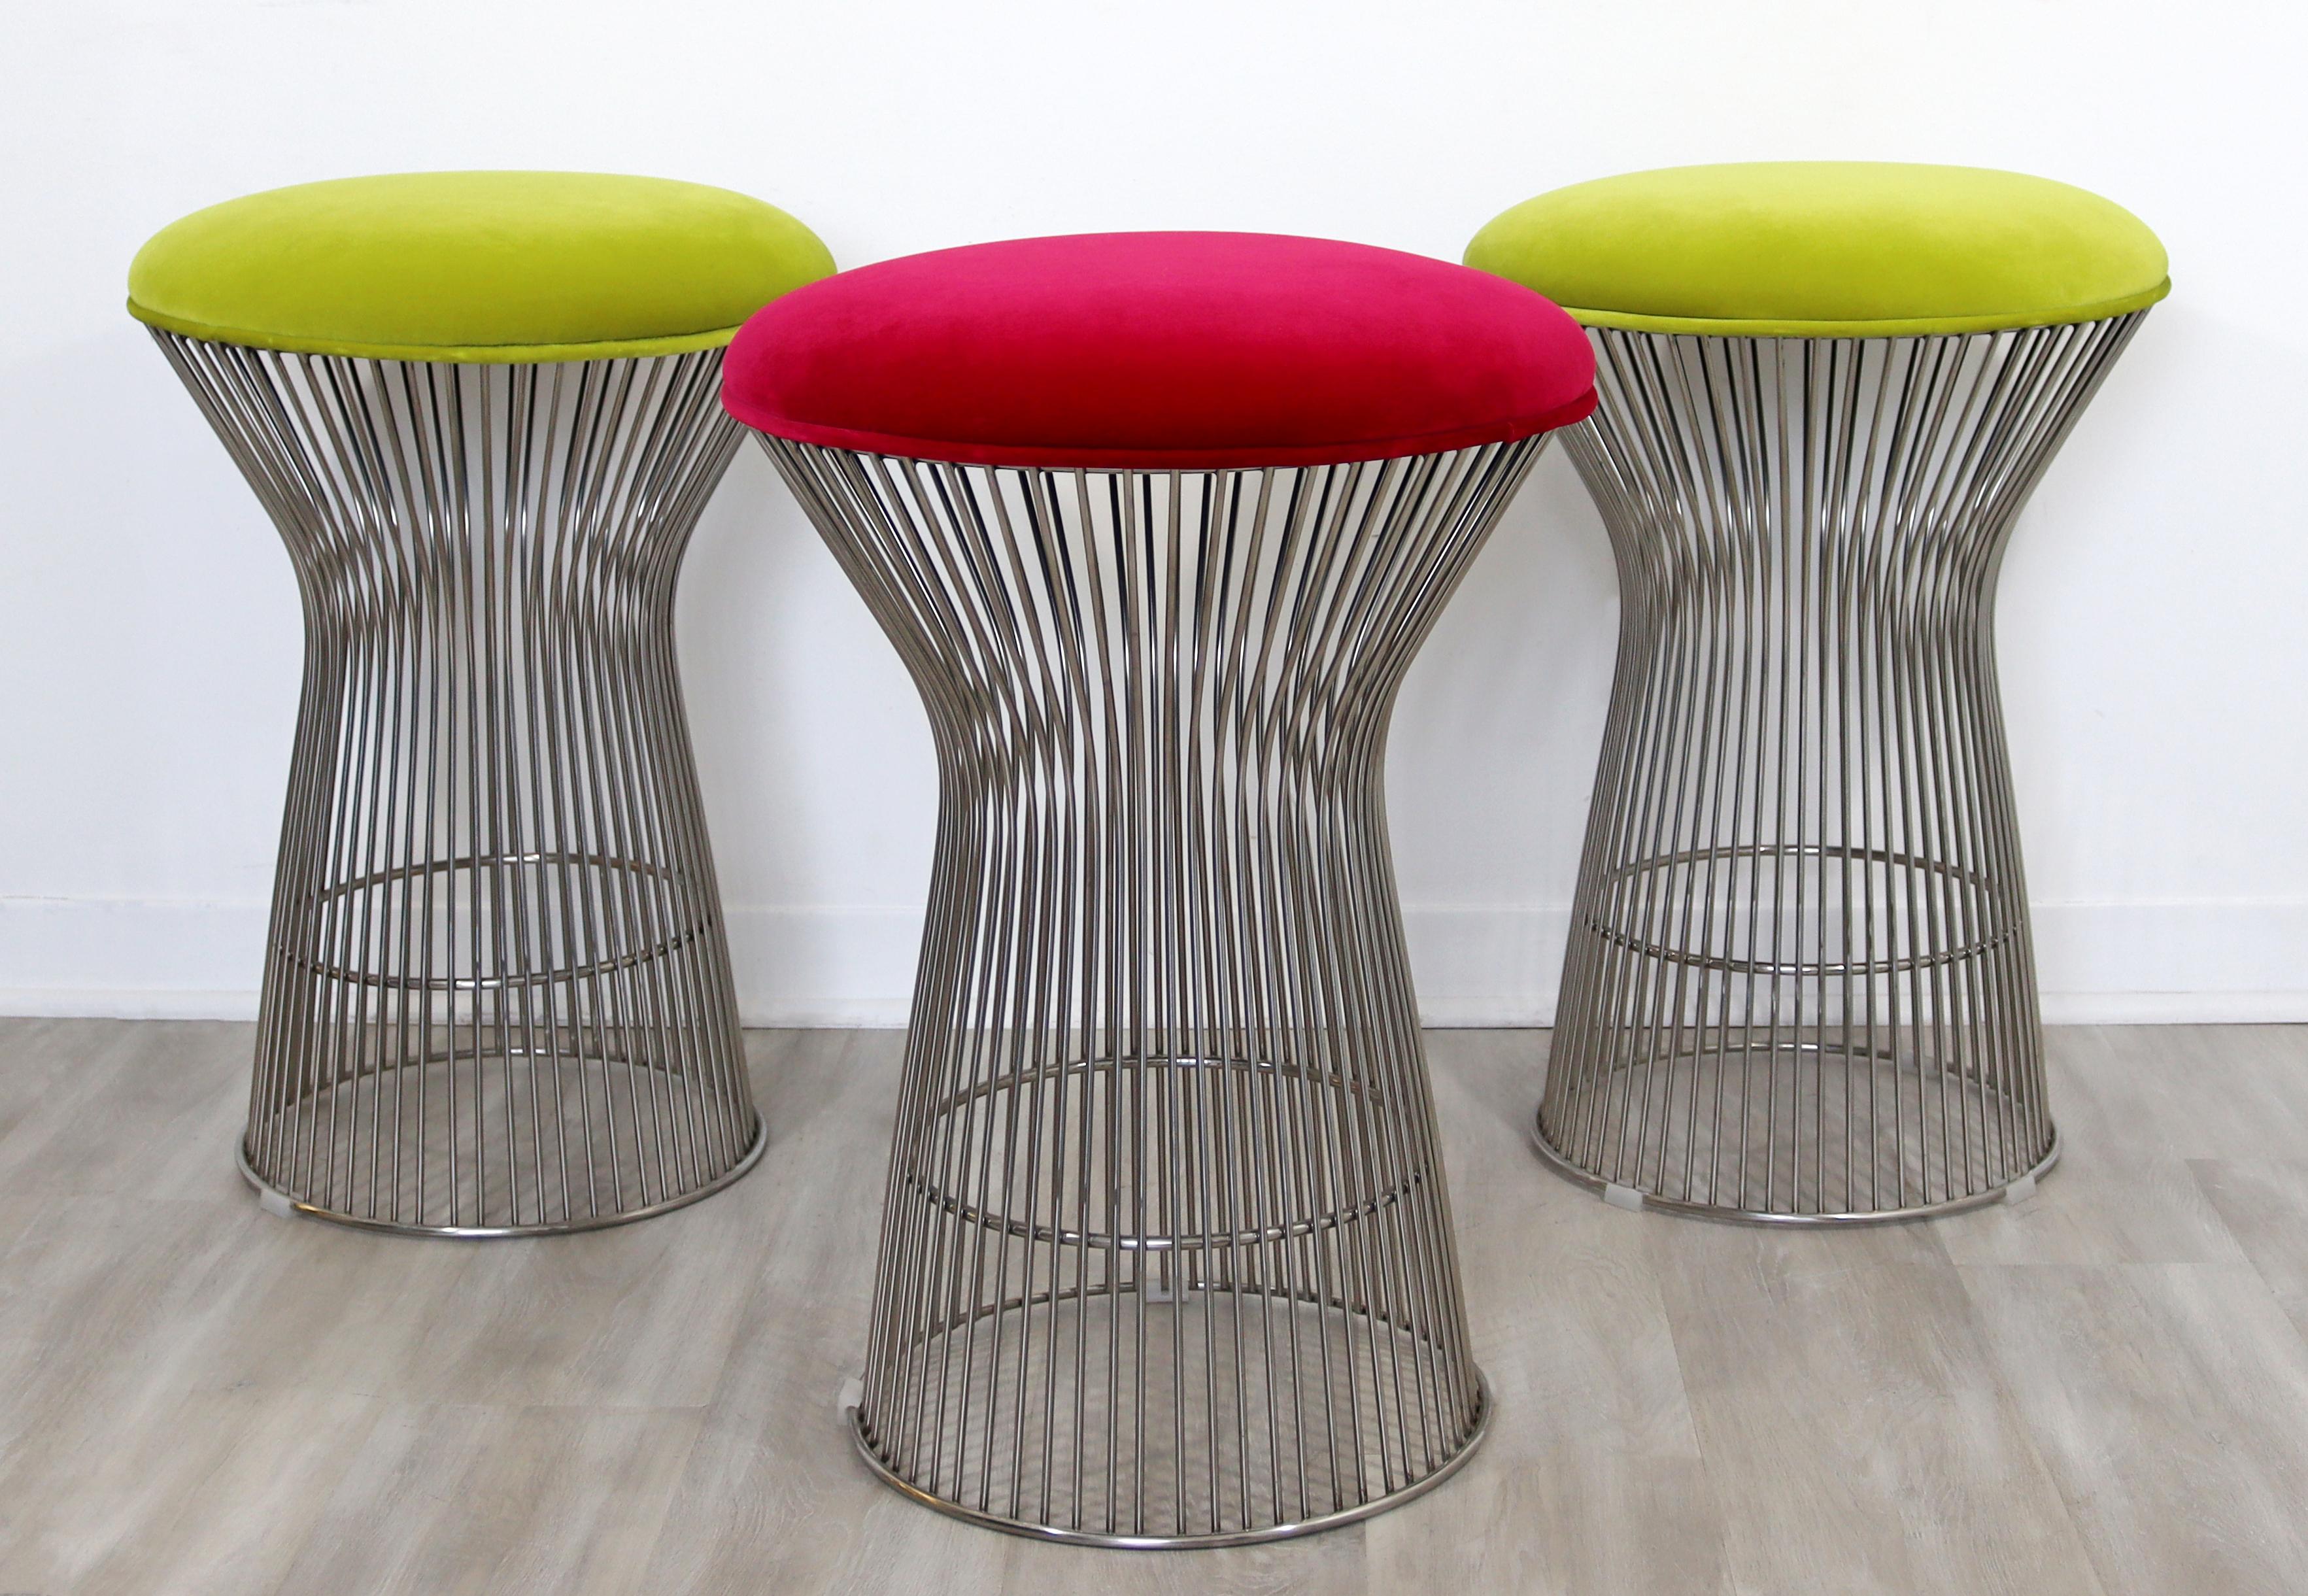 For your consideration is a thrilling set of three counter bar stools, made of chrome and with velvet seats, in the style of Warren Platner. In excellent condition, with a couple small, hard to notice spots on the seats. The dimensions are 18